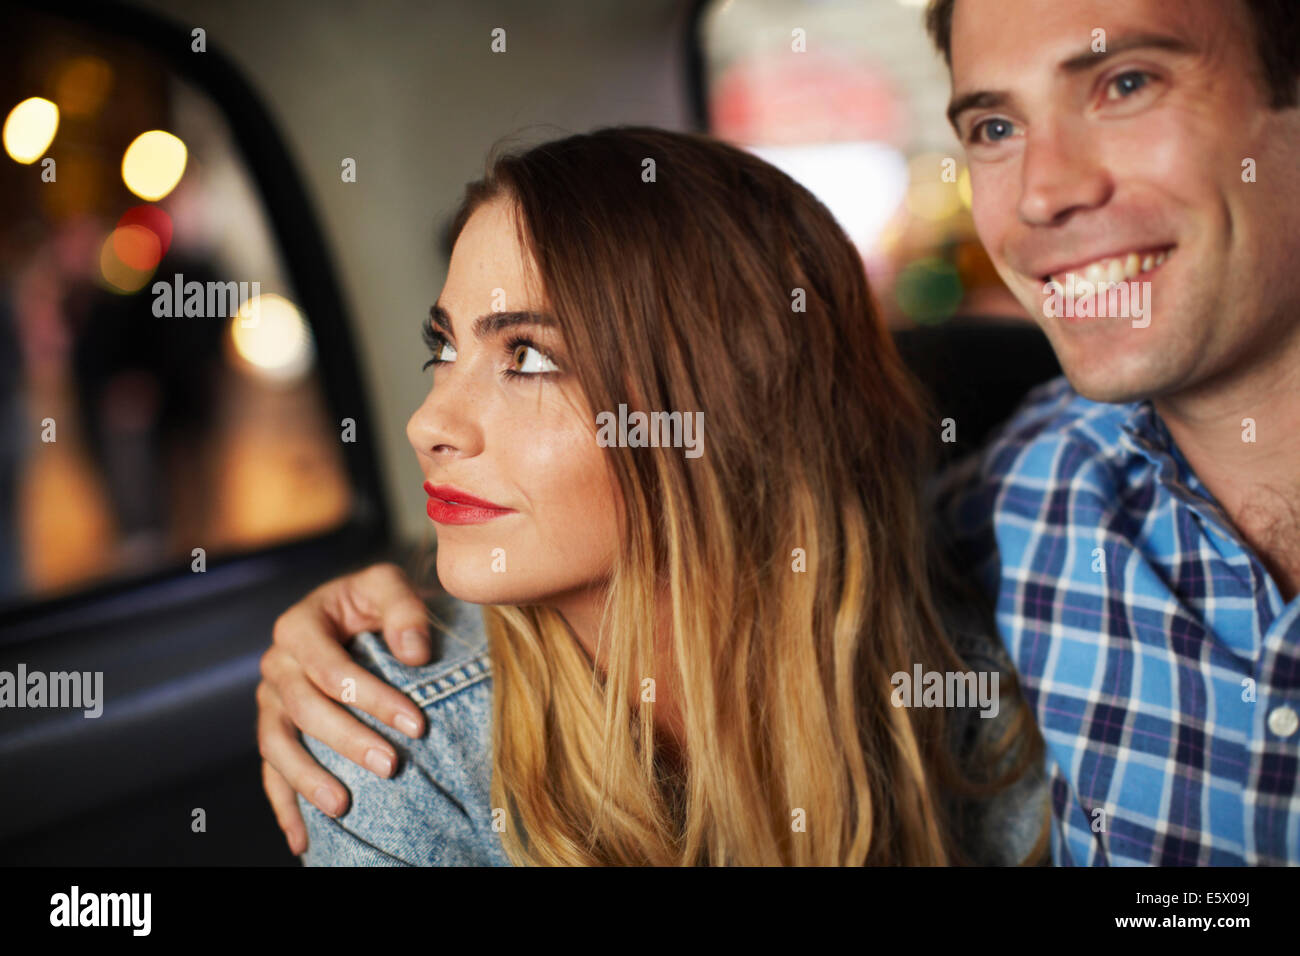 Couple going out in city taxi at night Stock Photo